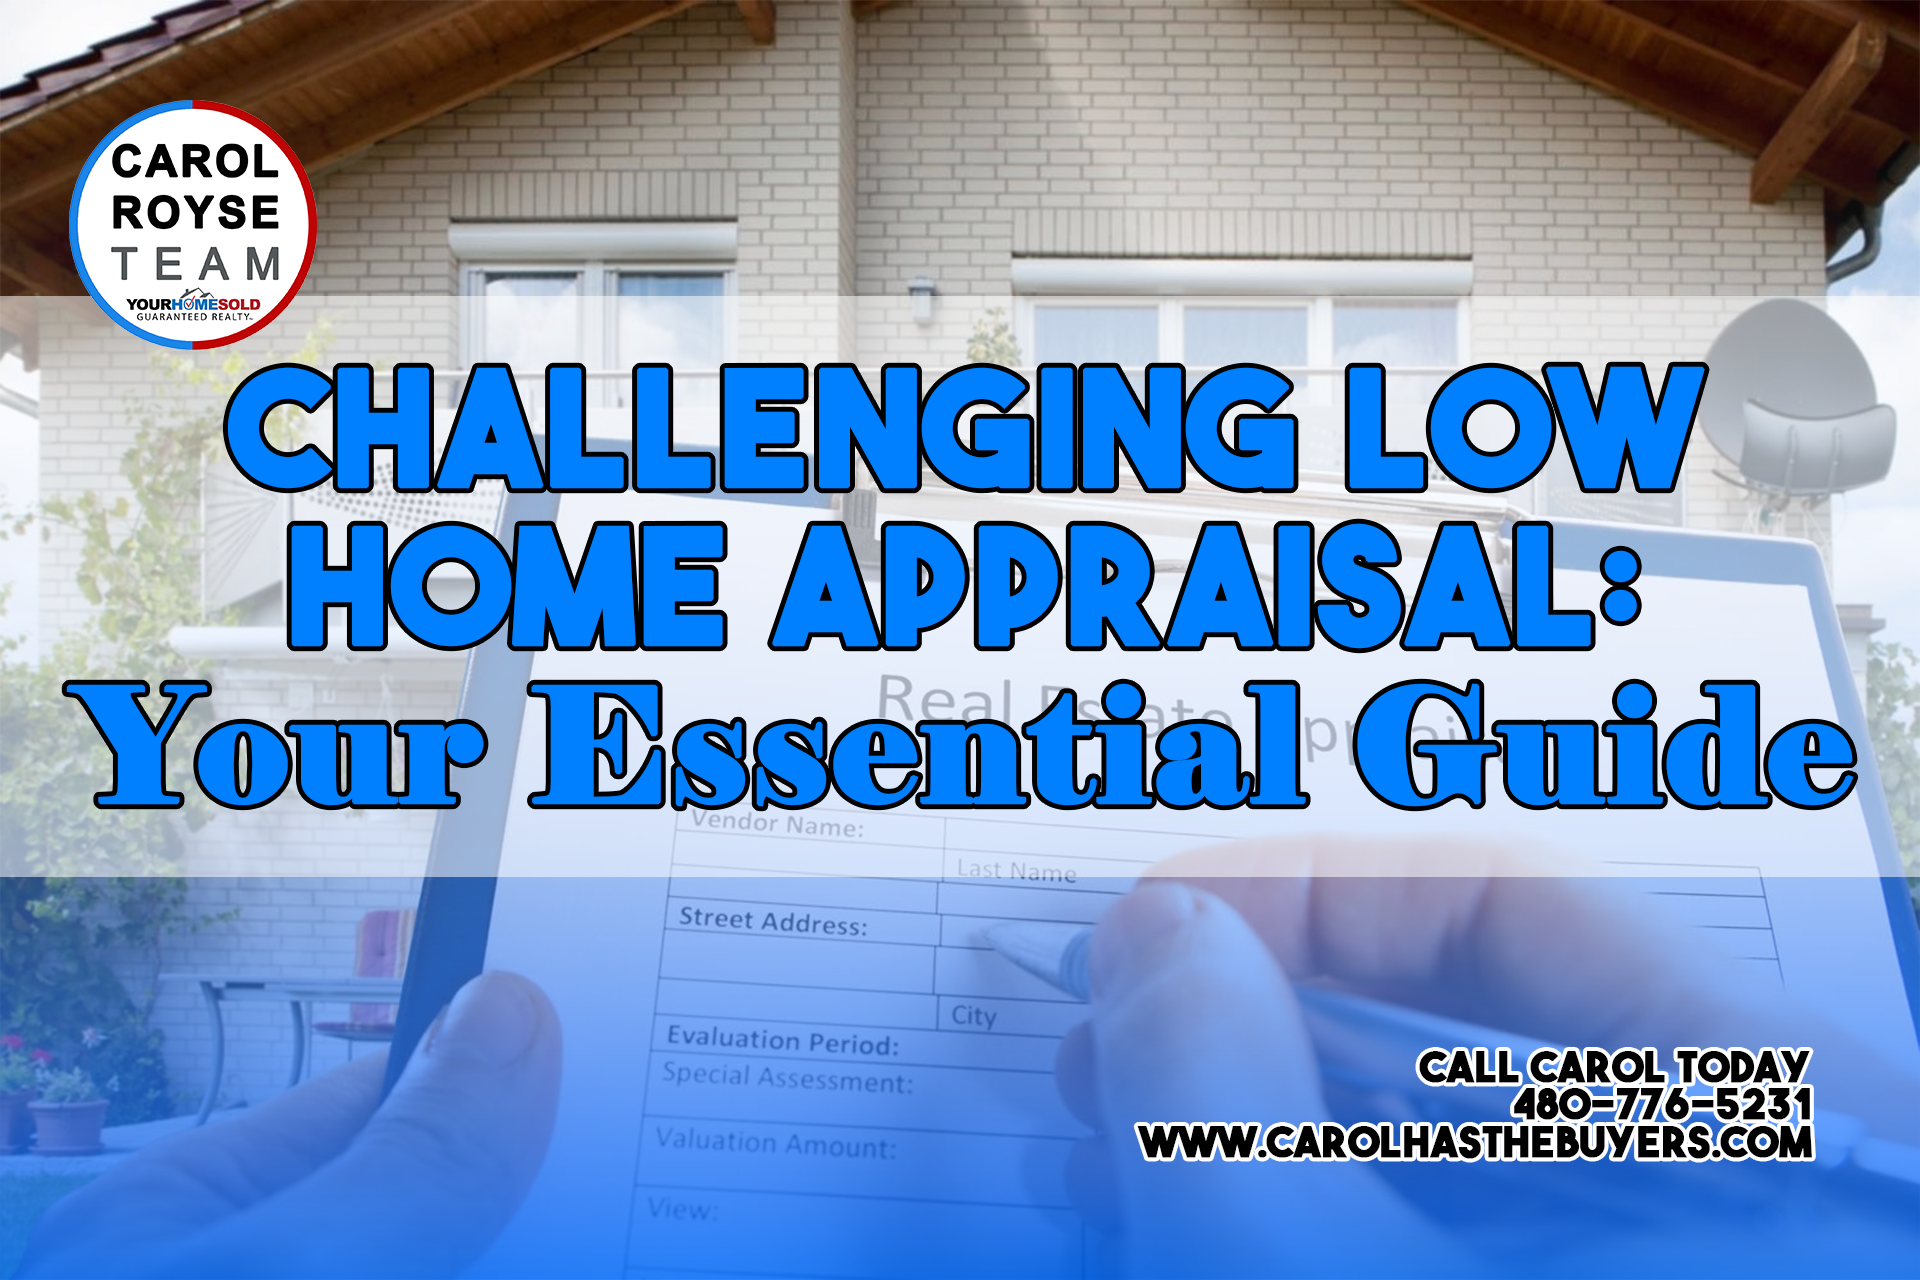 Challenging Low Home Appraisal: Your Essential Guide